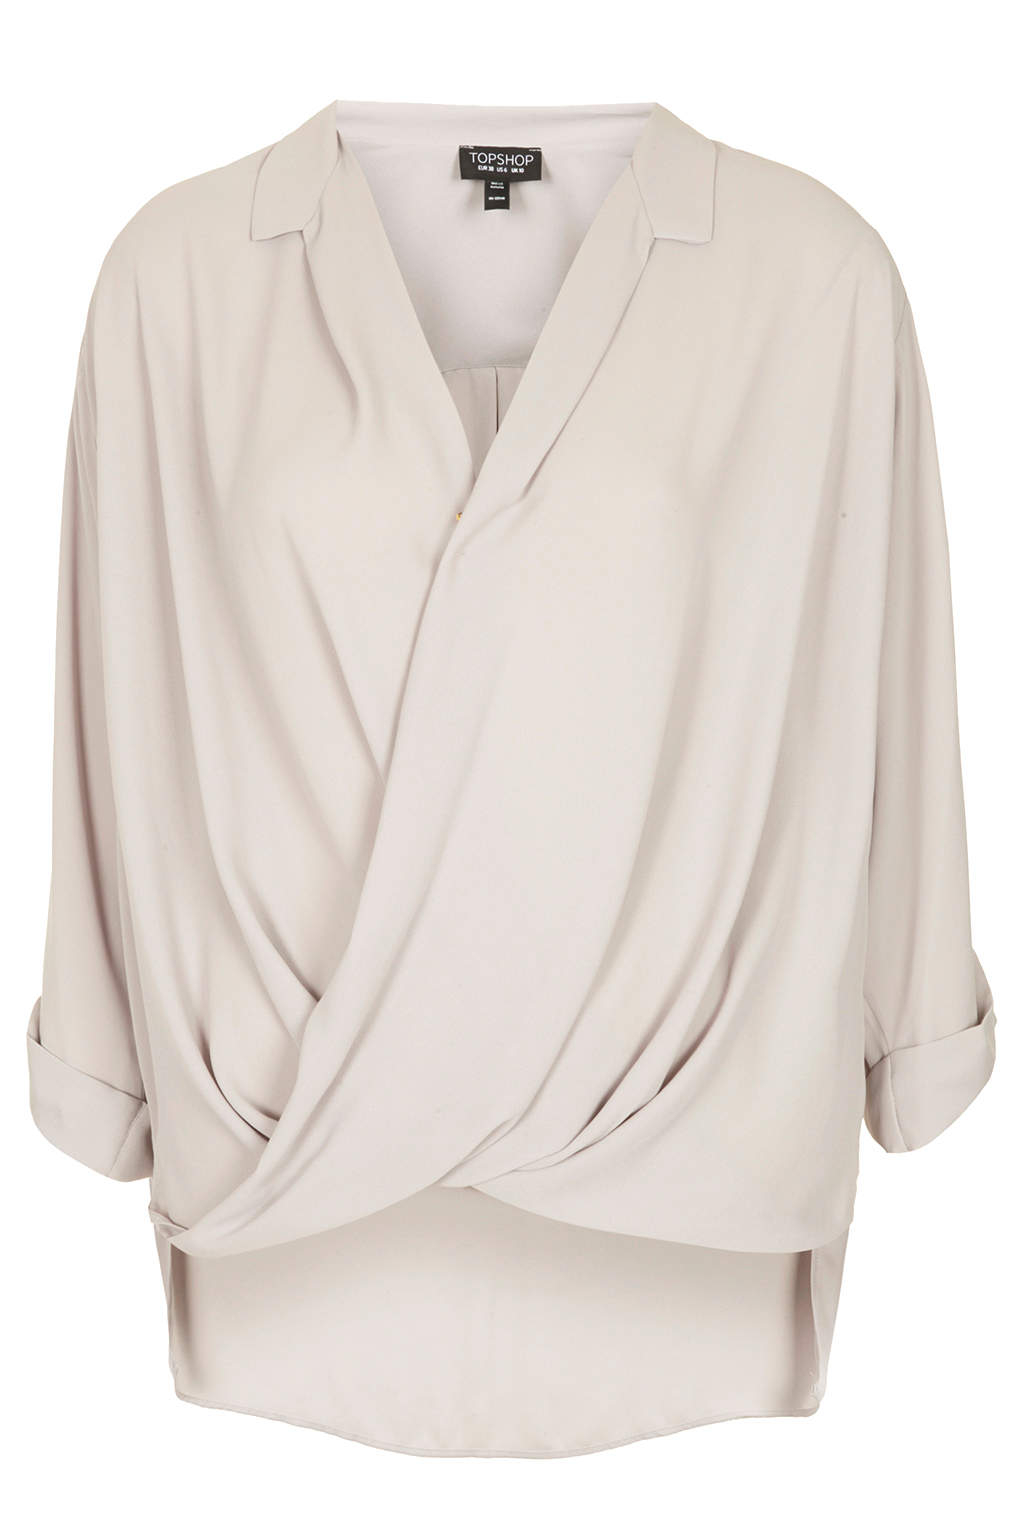 Lyst - Topshop Formal Drape Front Blouse in Gray